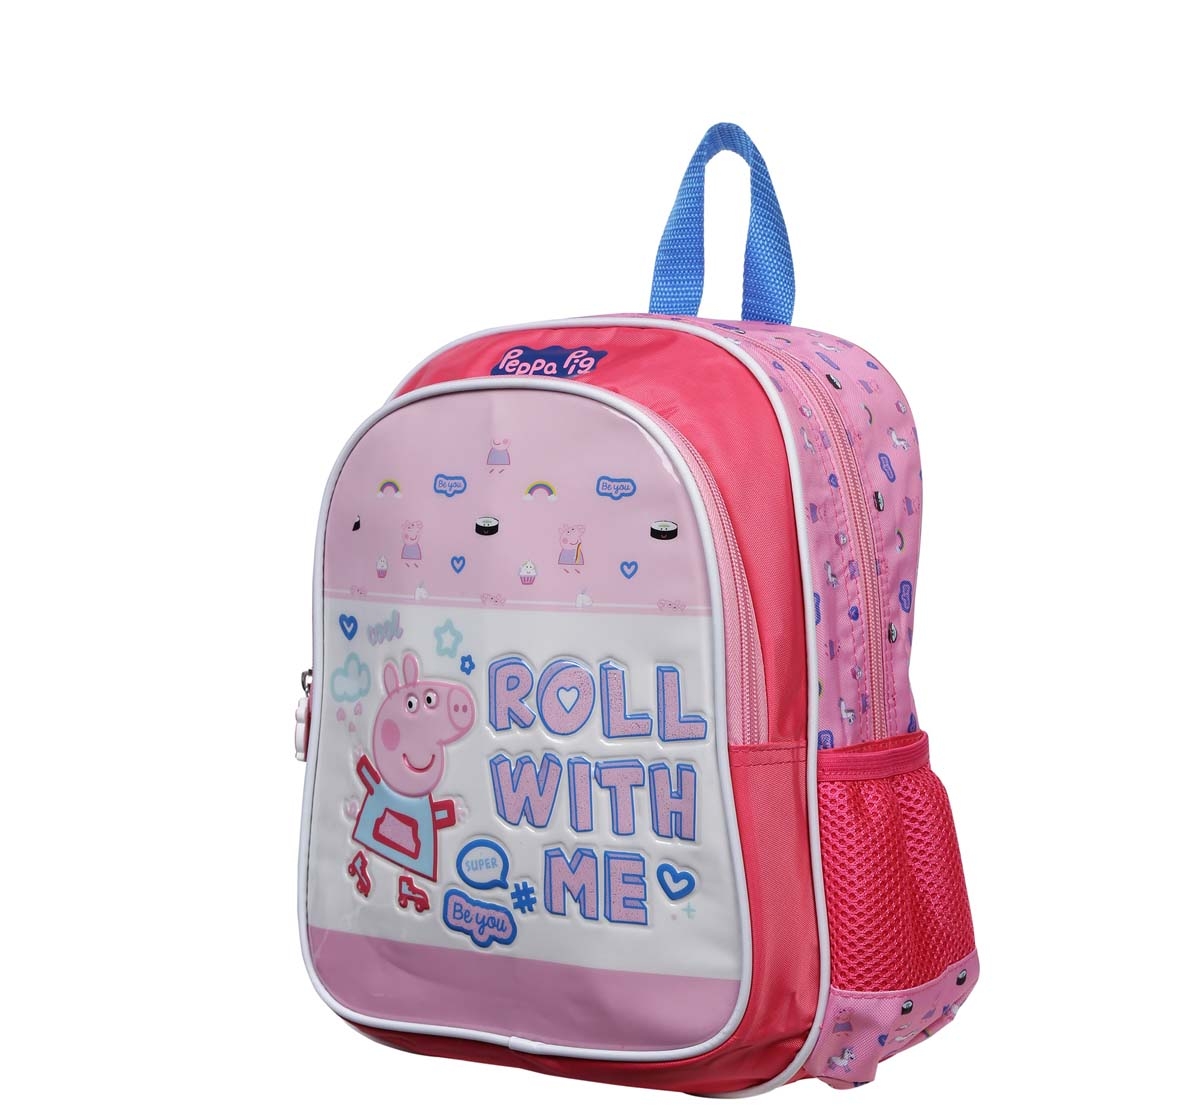 Peppa Pig | Peppa Pig Roll with Me 12 Backpack Bags for Kids age 3Y+  1